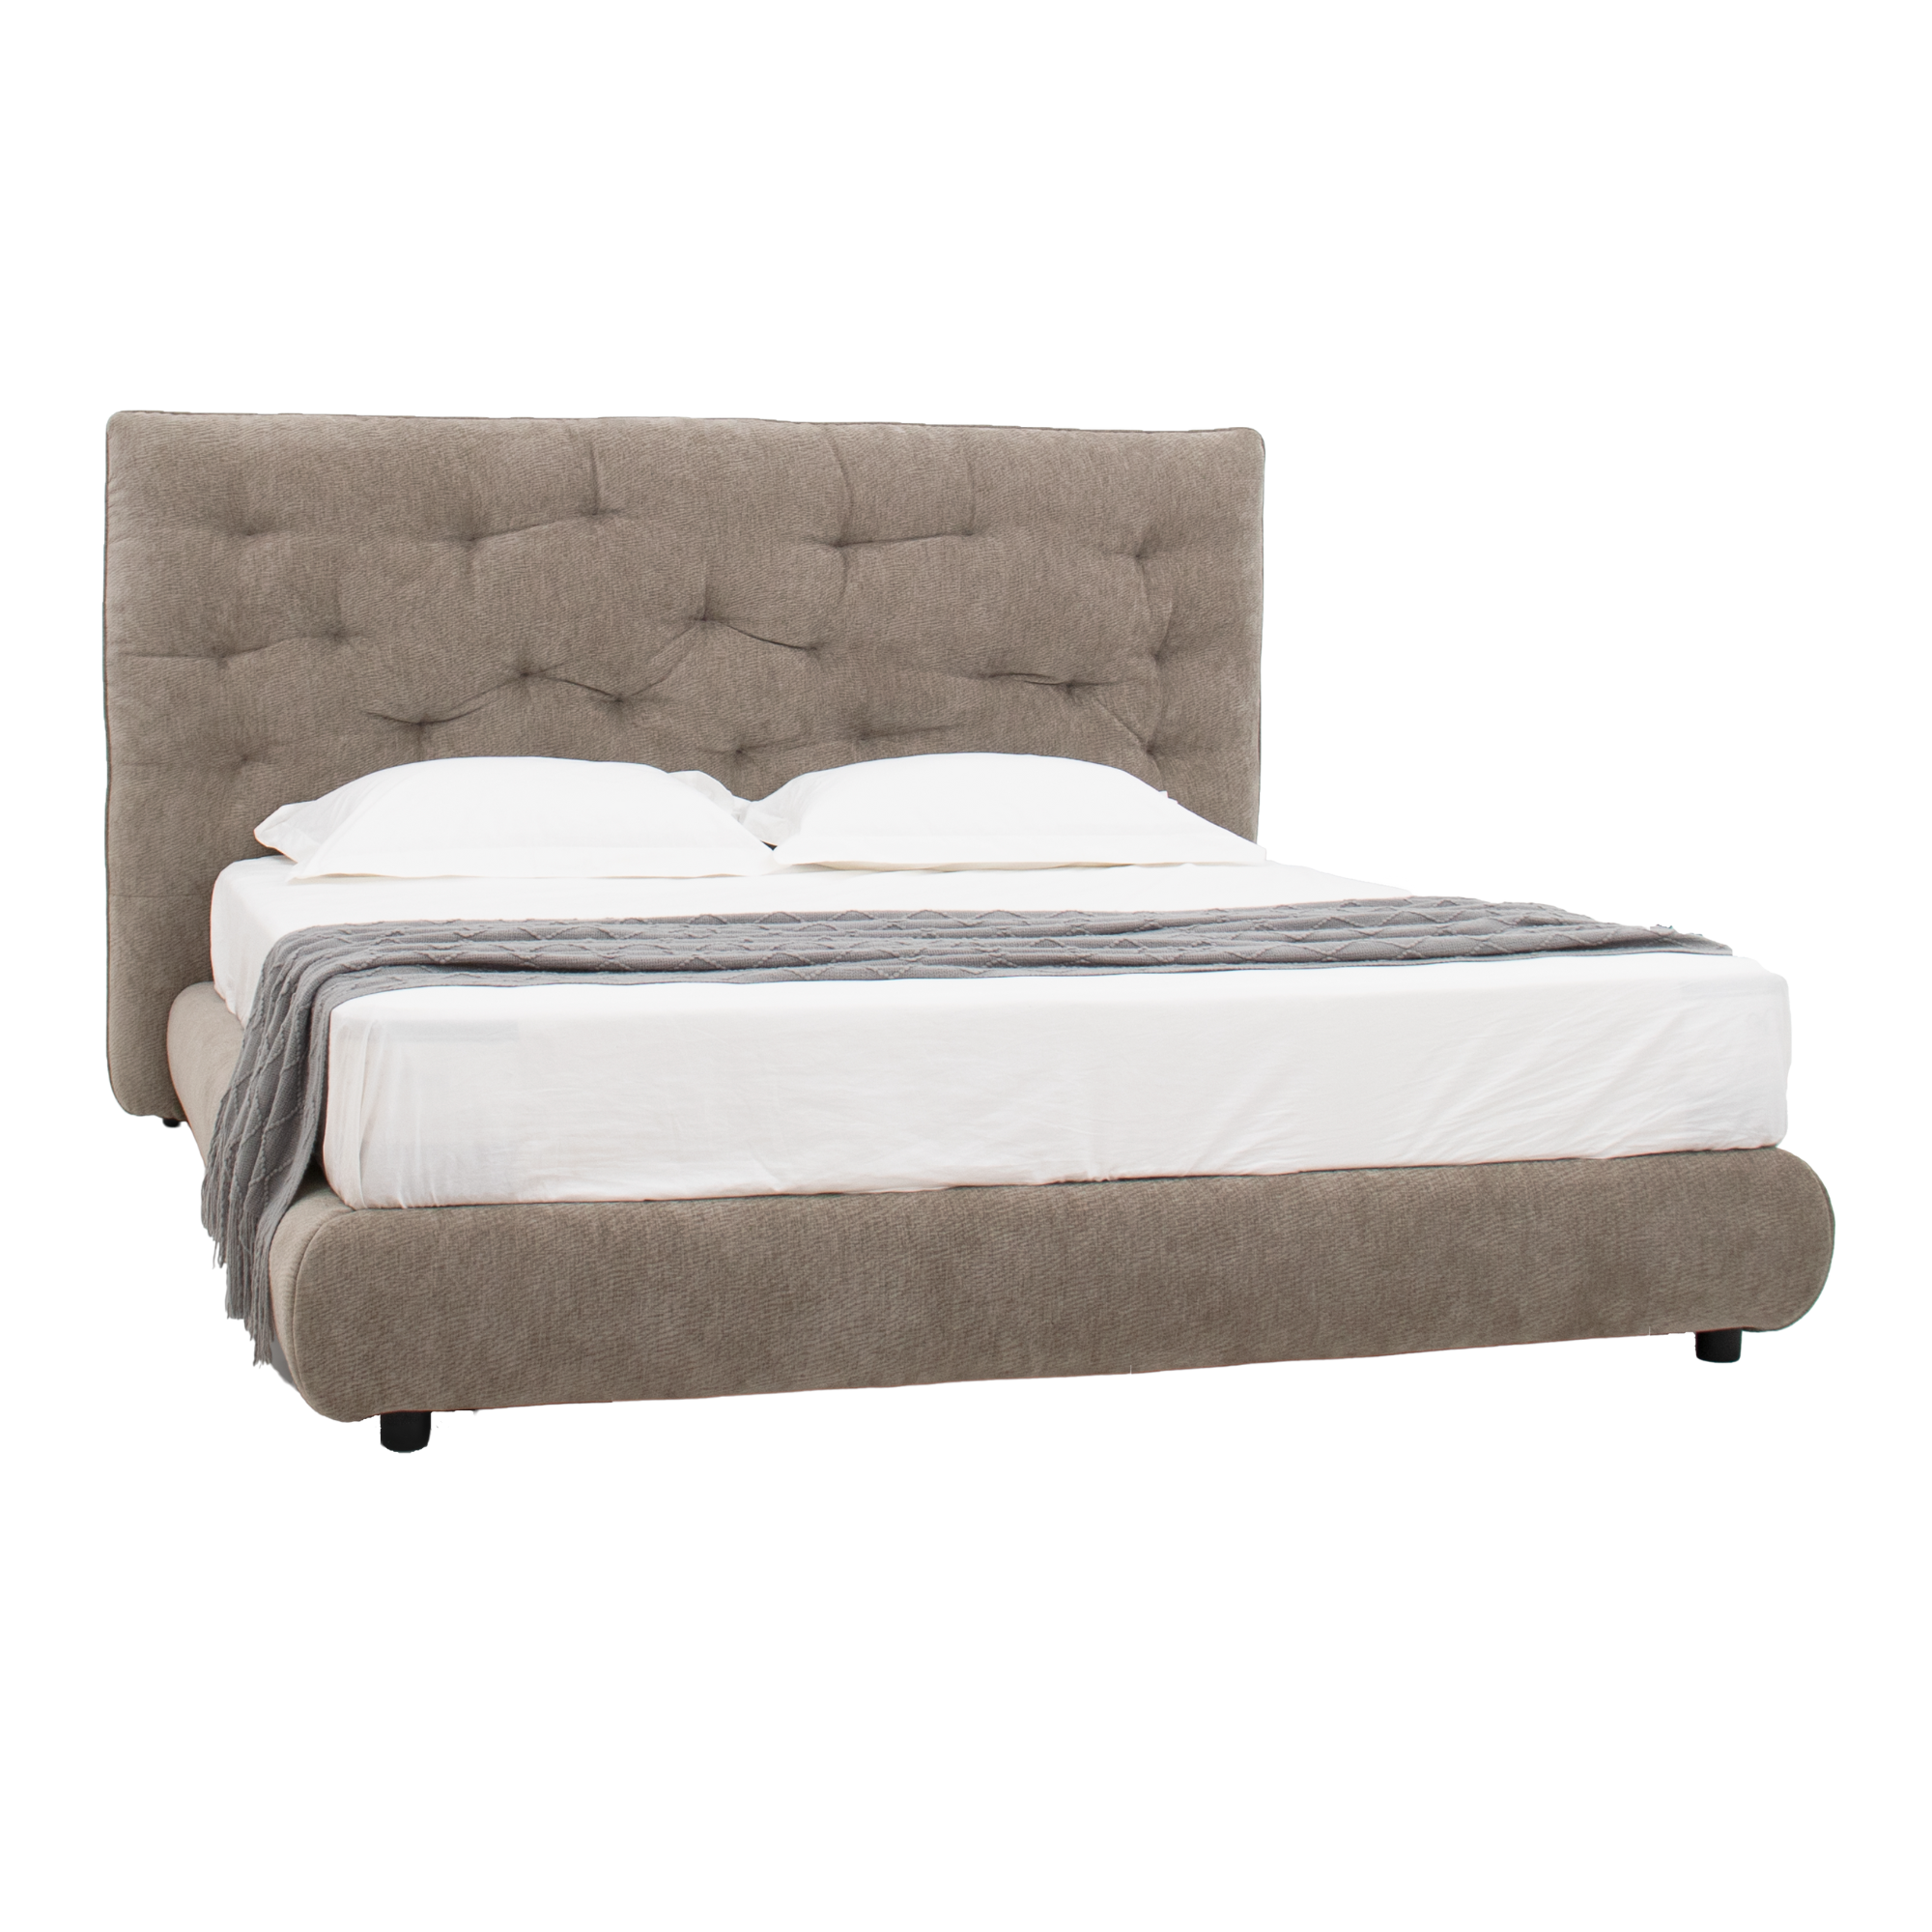 Object A180 Upholstered Bed Frame in Beige Chenille